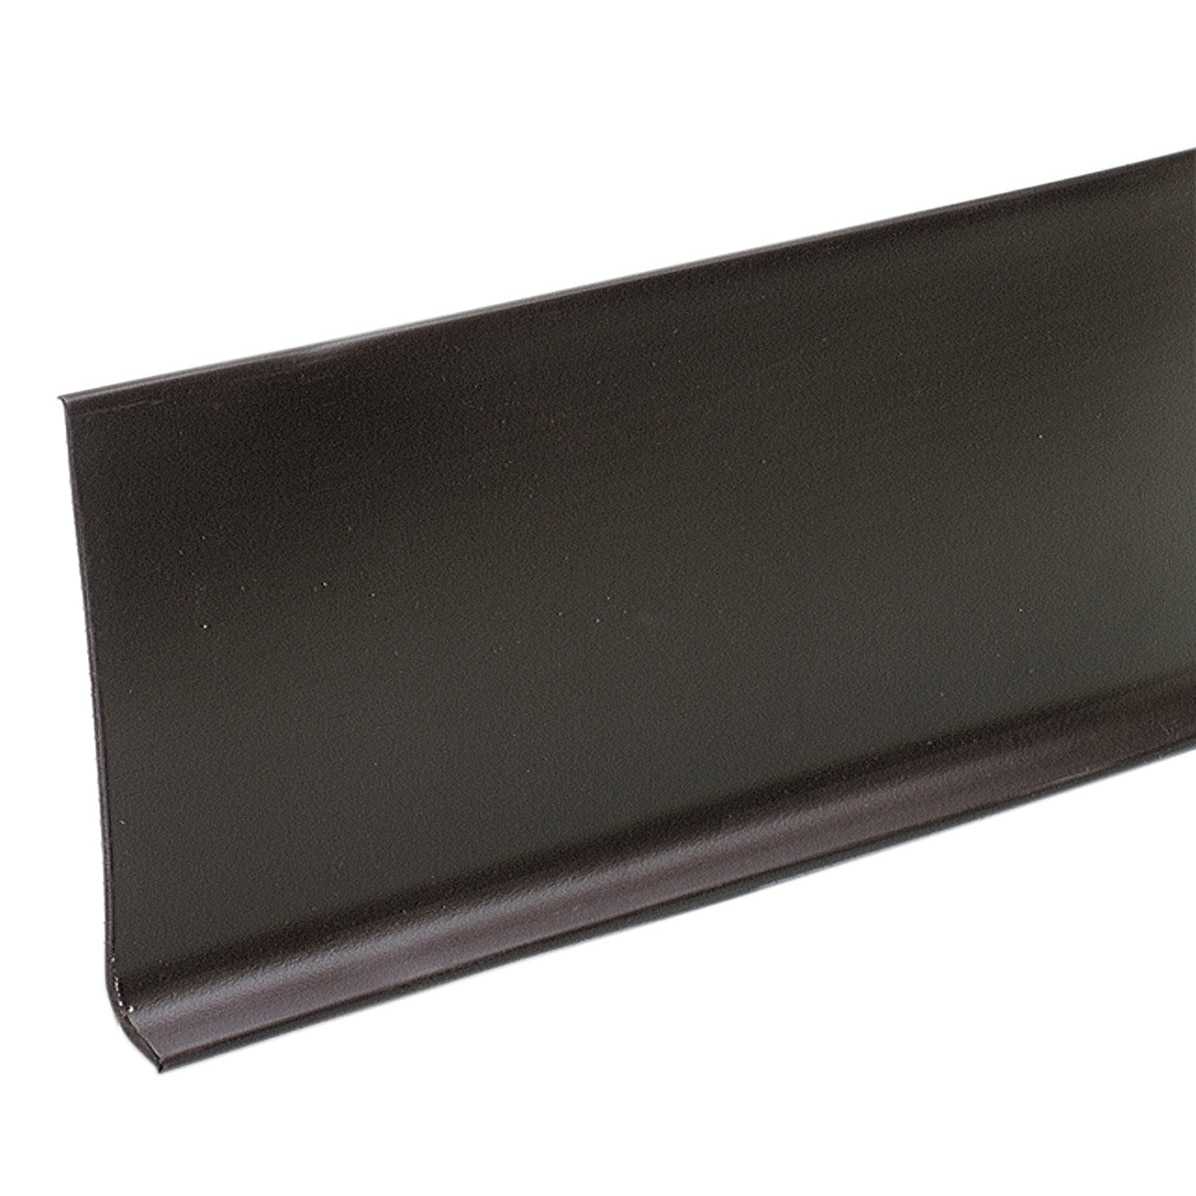 M-D Products 73900 Brown Vinyl Dryback Wall Base, 4' x 60'